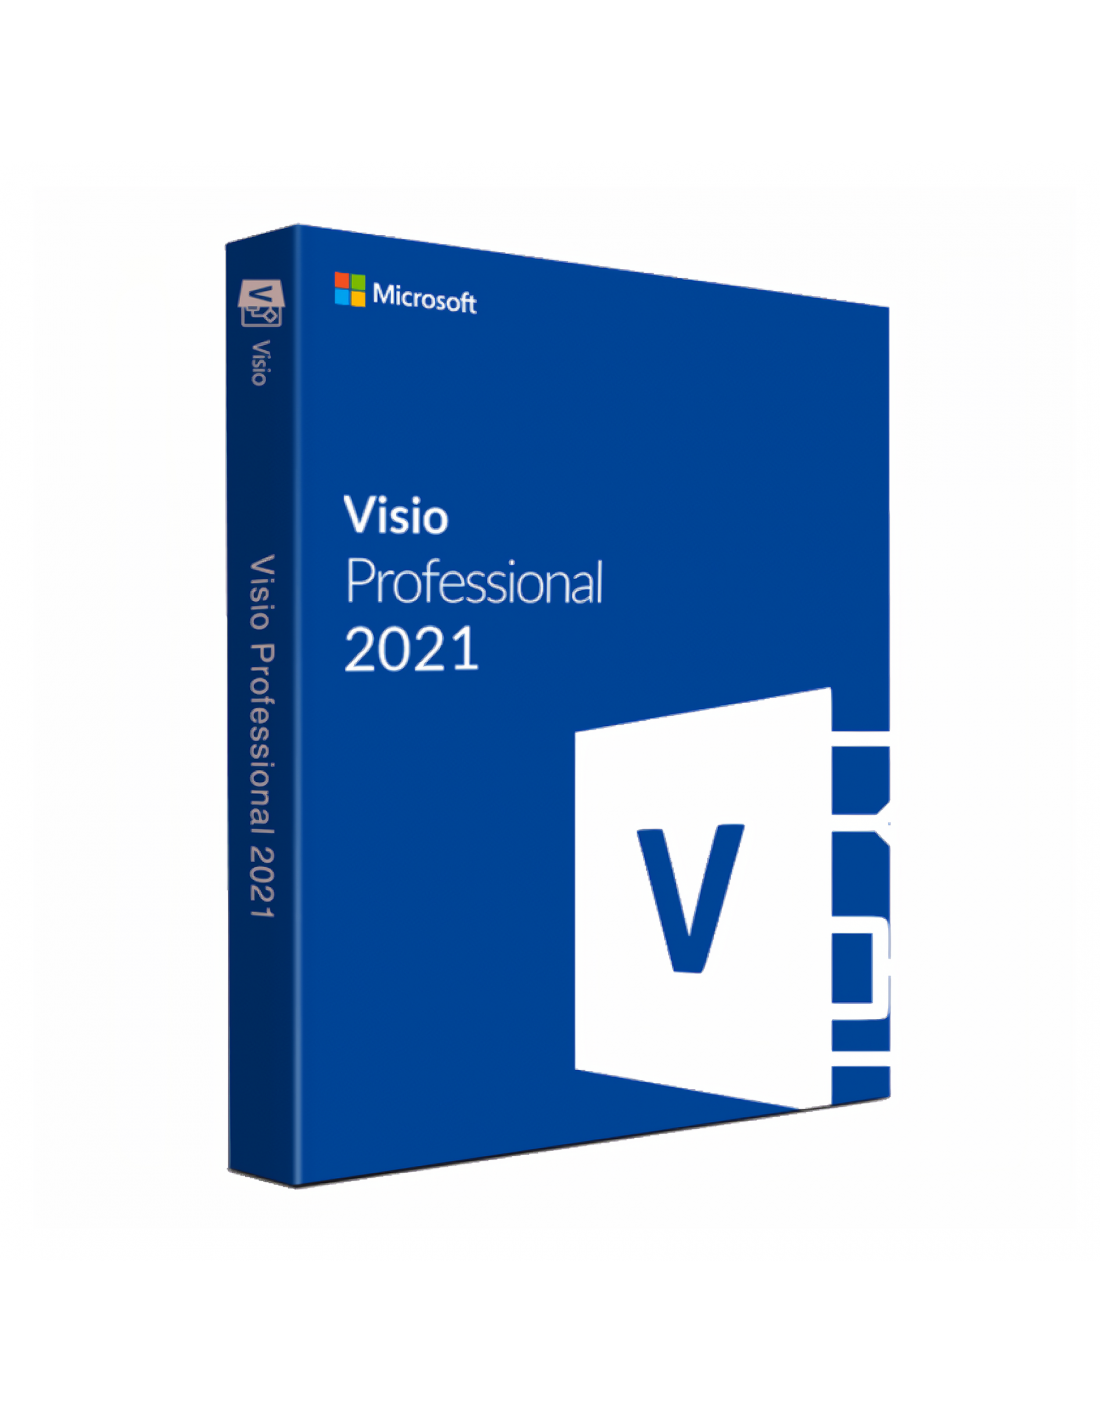 Microsoft Visio Professional 2021 download the new version for windows